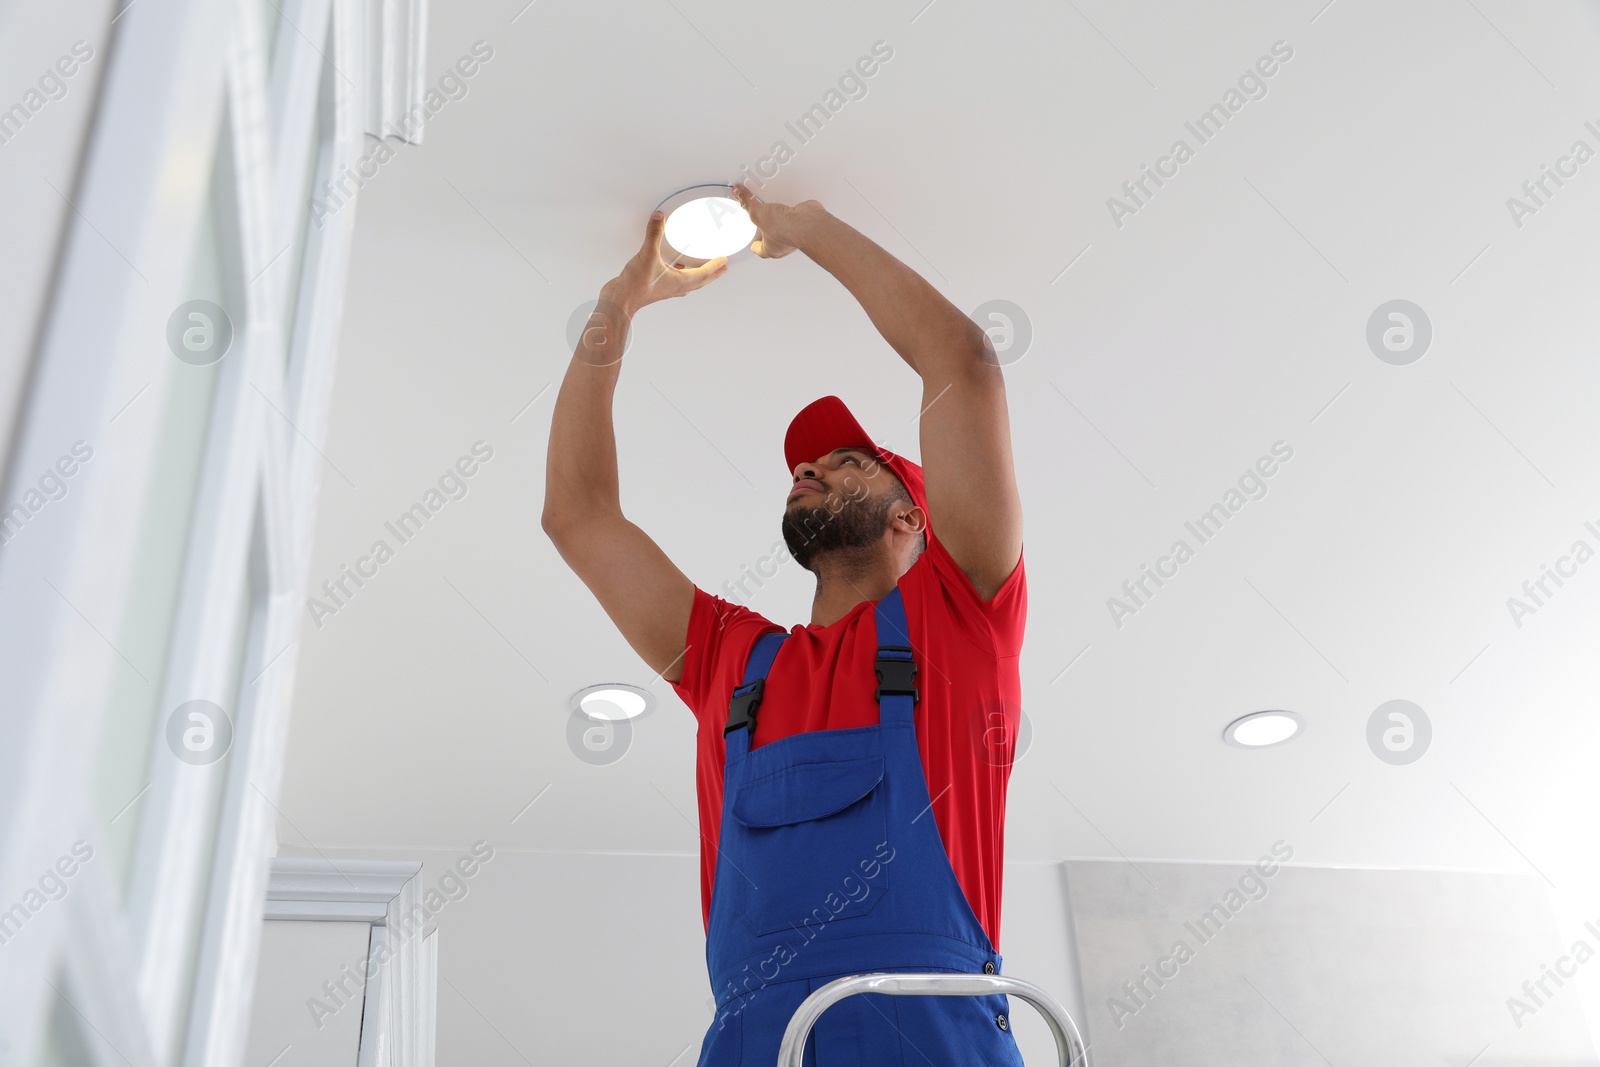 Photo of Electrician repairing ceiling lamp indoors, low angle view